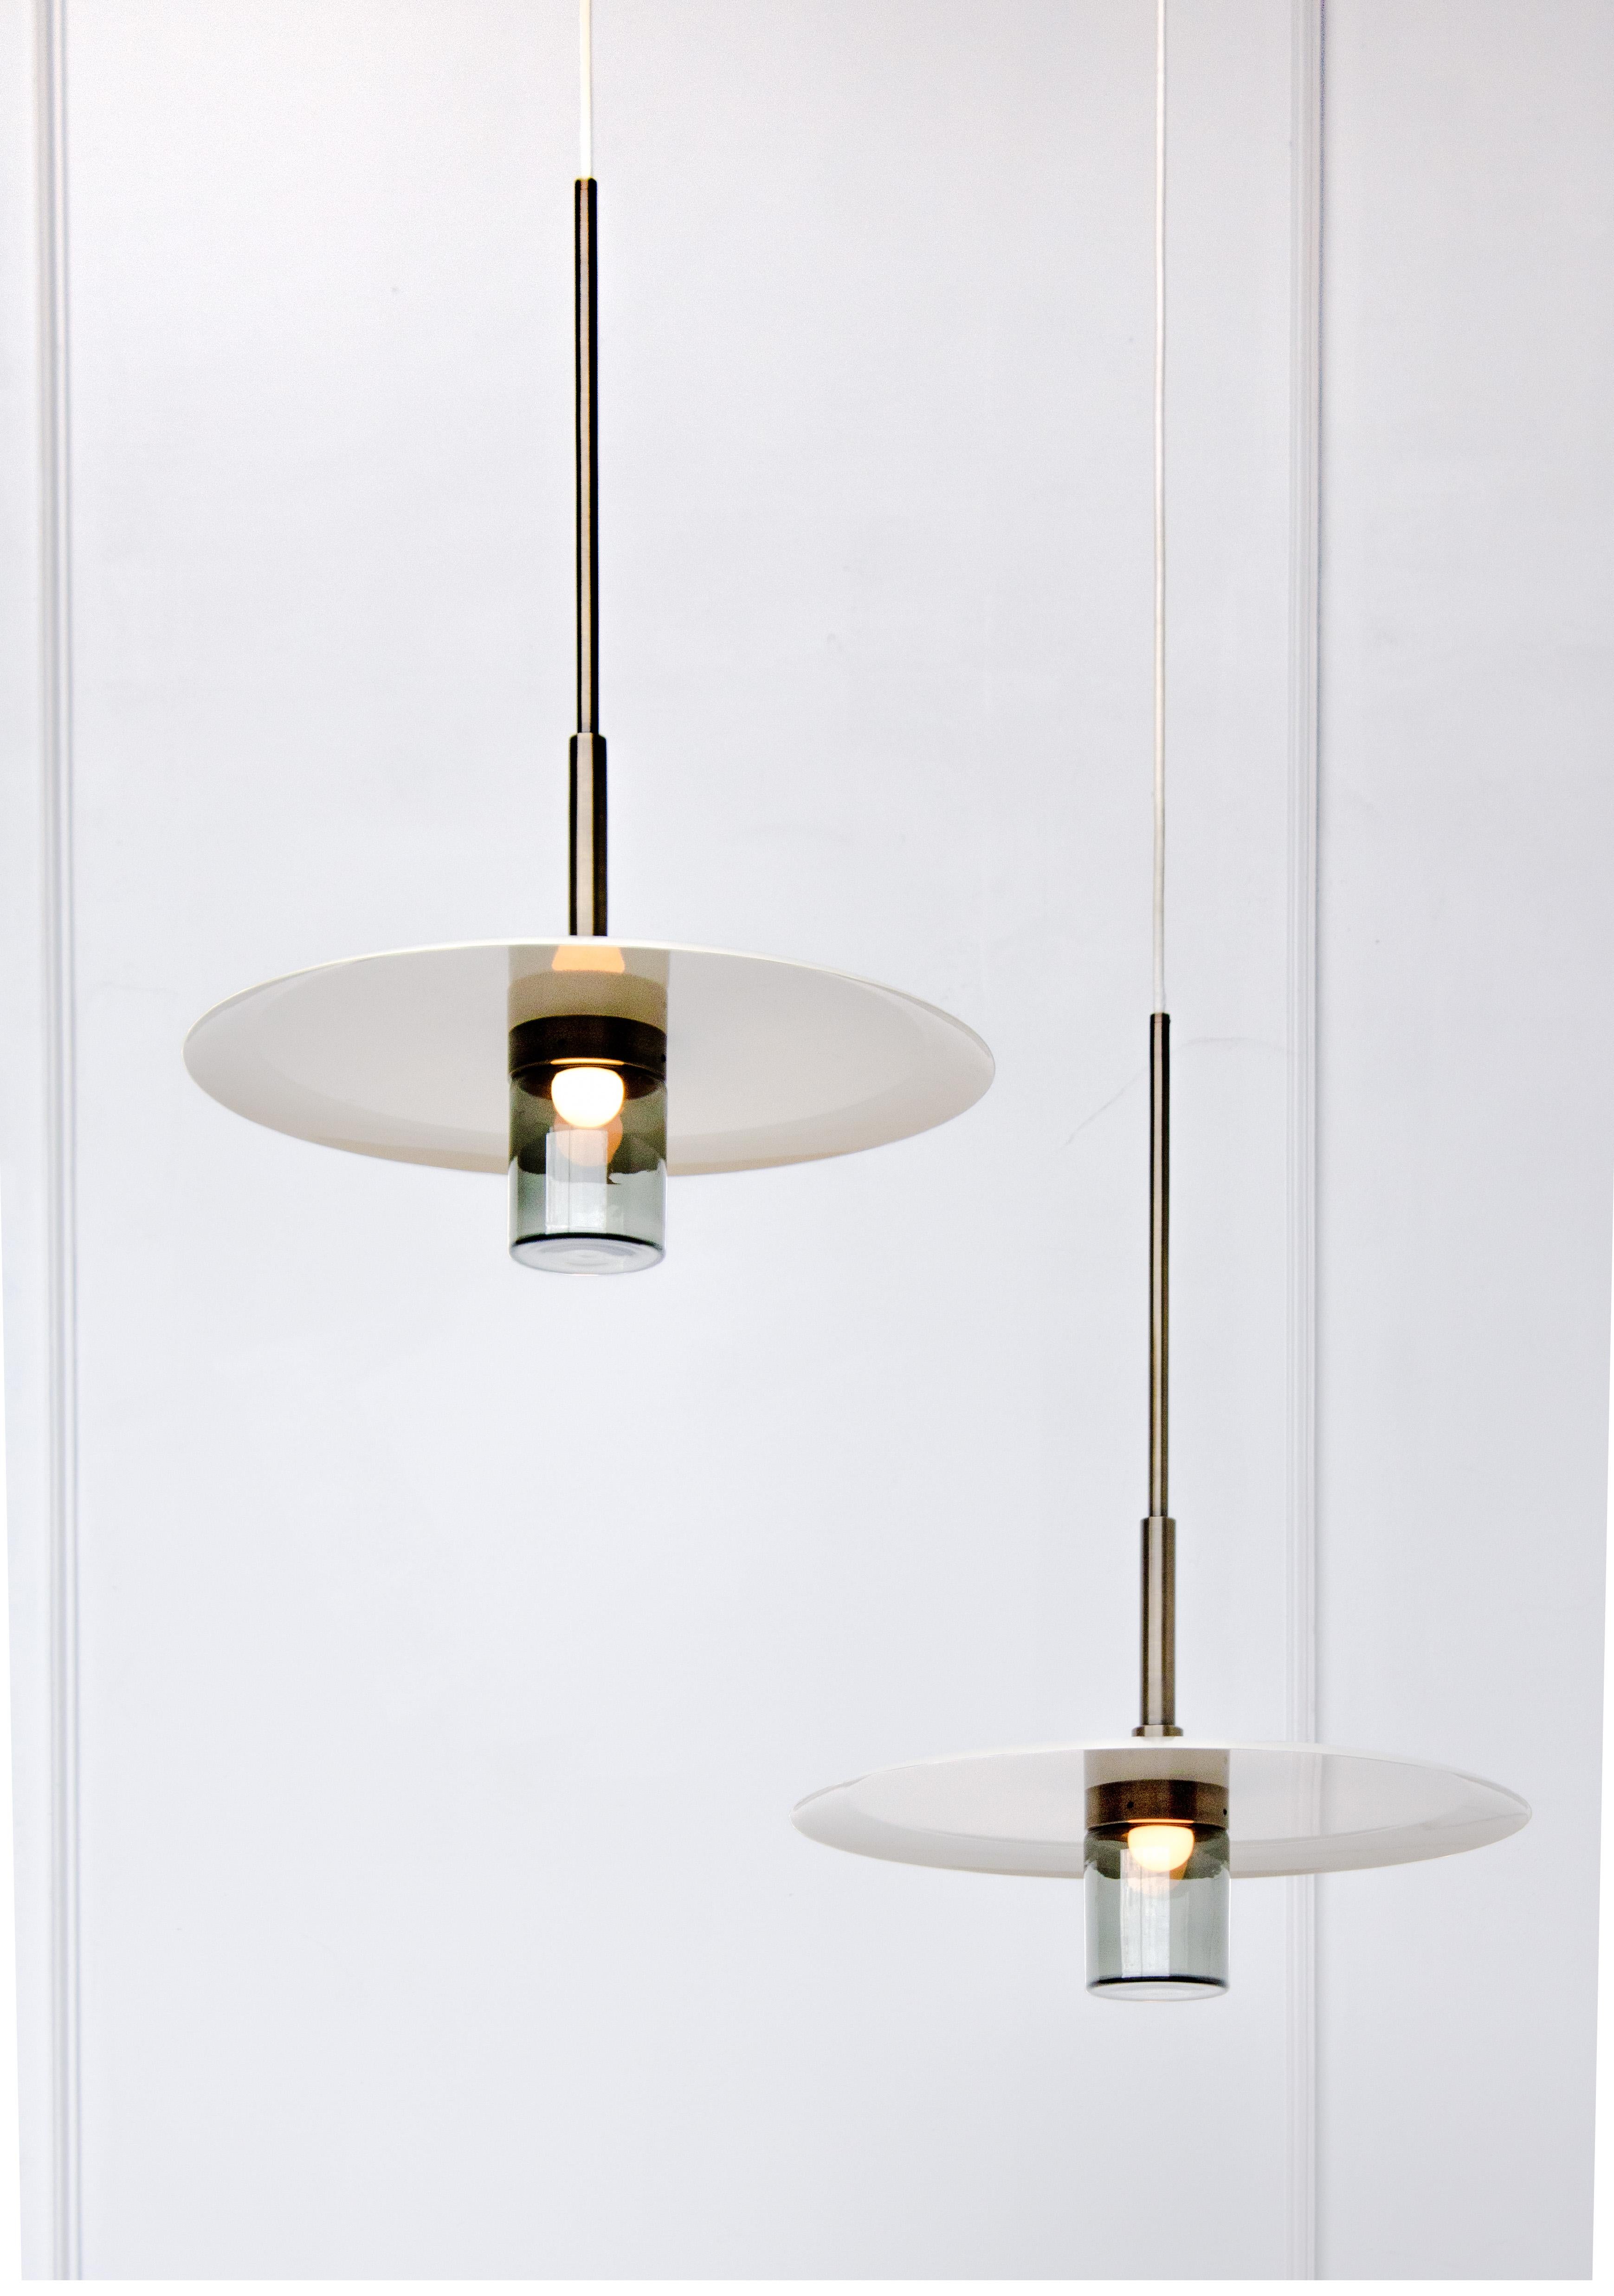 Other Arthur Pendant with a Powder-Coated Shade, Blonde Patina and Smoked Glass For Sale